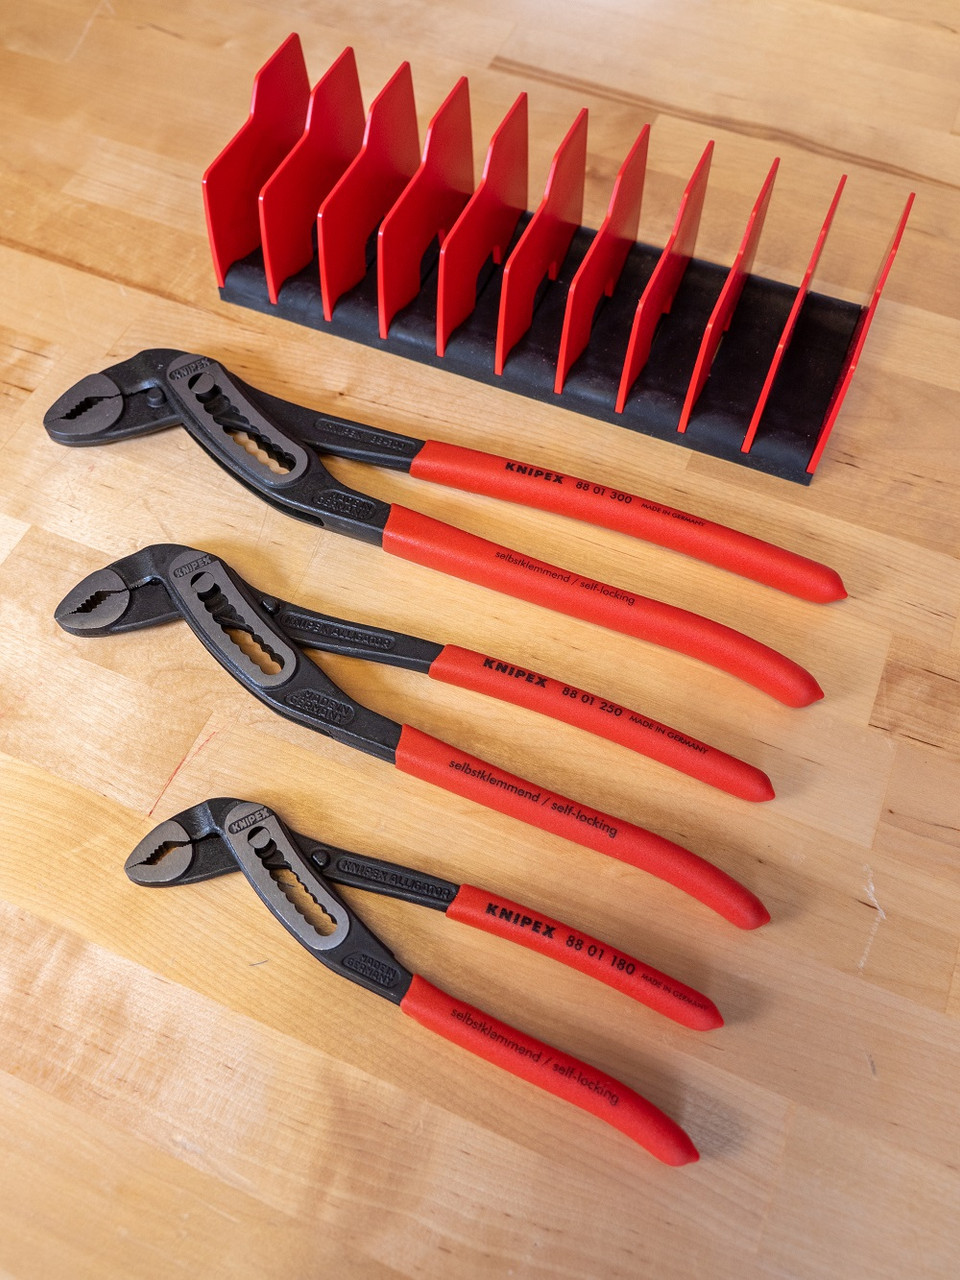 Knipex 9K 00 80 139 US 3 Pc. Alligator® Pliers Set – with FREE 10 Piece  Tool Holder Rack - ChadsToolbox.com Inc